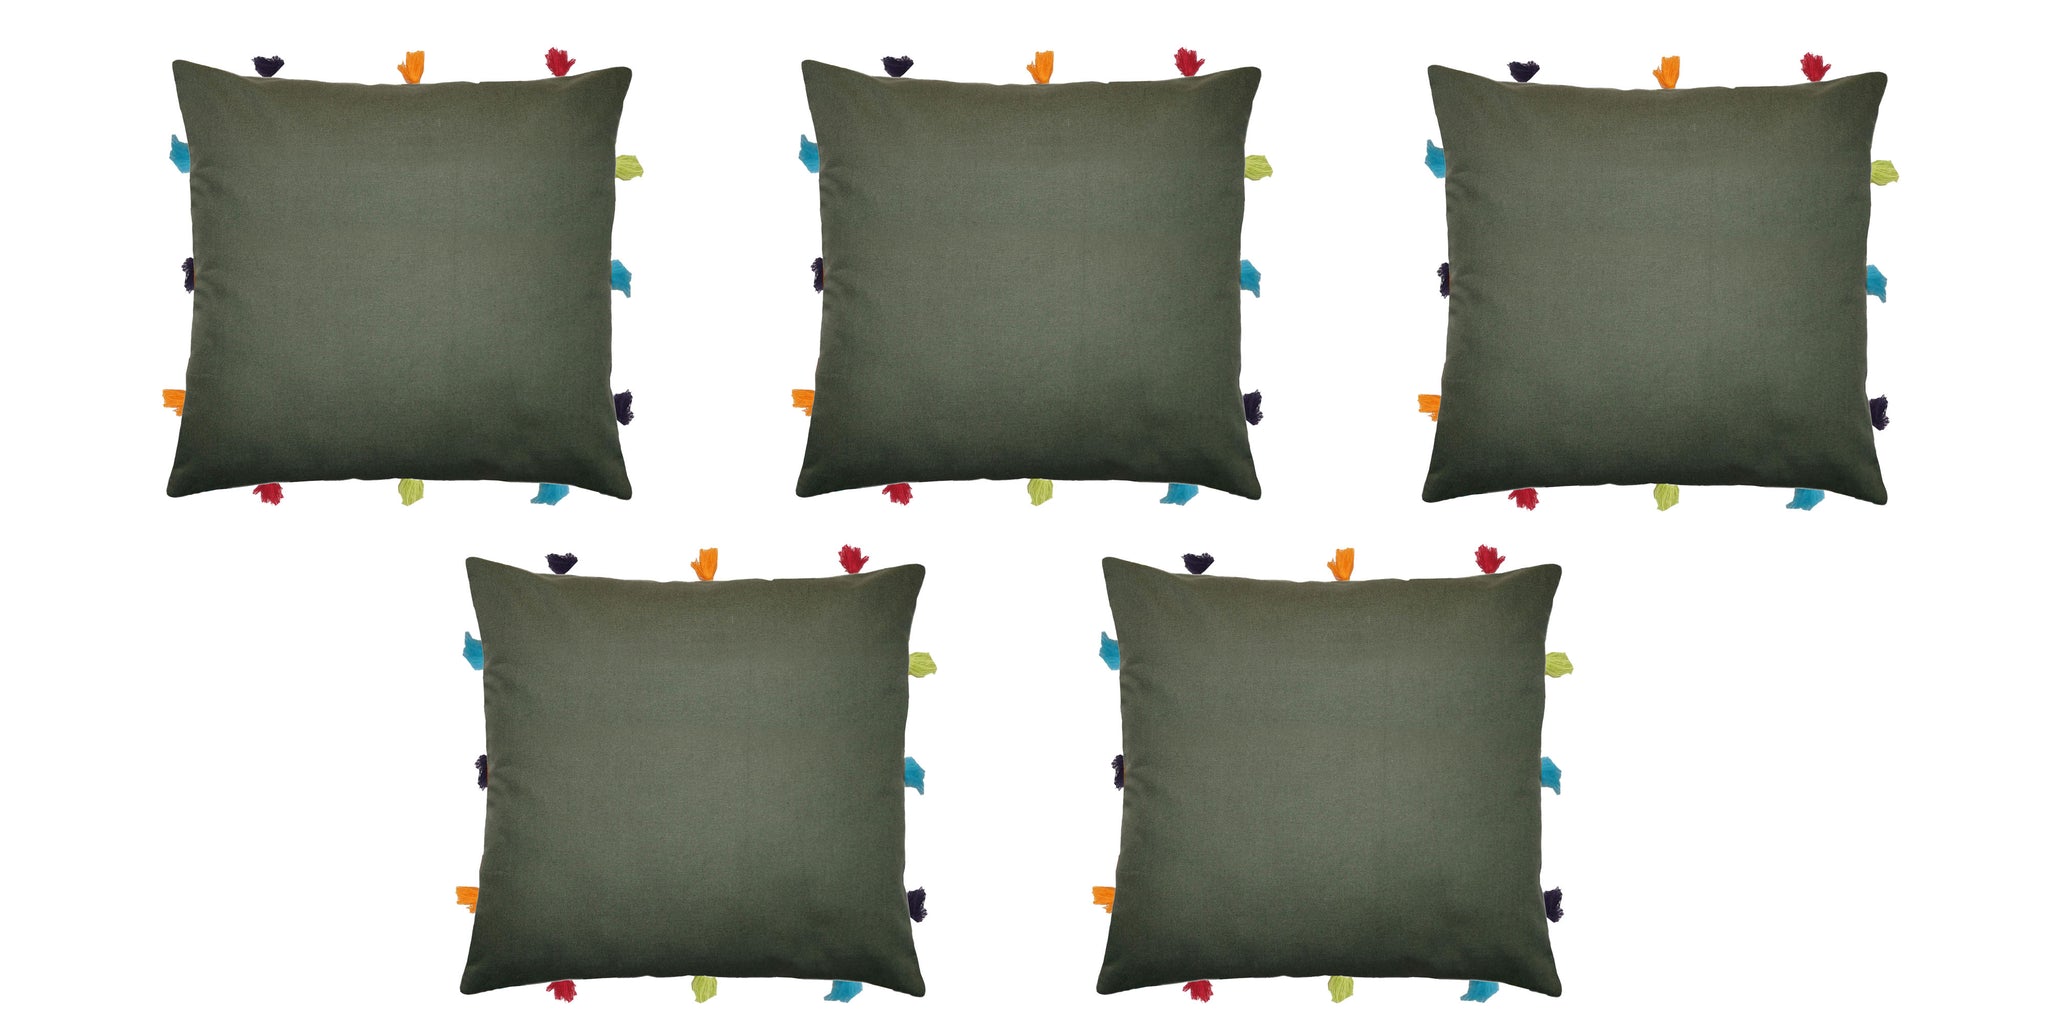 Lushomes cushion cover 12x12, boho cushion covers, sofa pillow cover, cushion covers with tassels, cushion cover with pom pom (12x12 Inches, Set of 5, Olive Green)